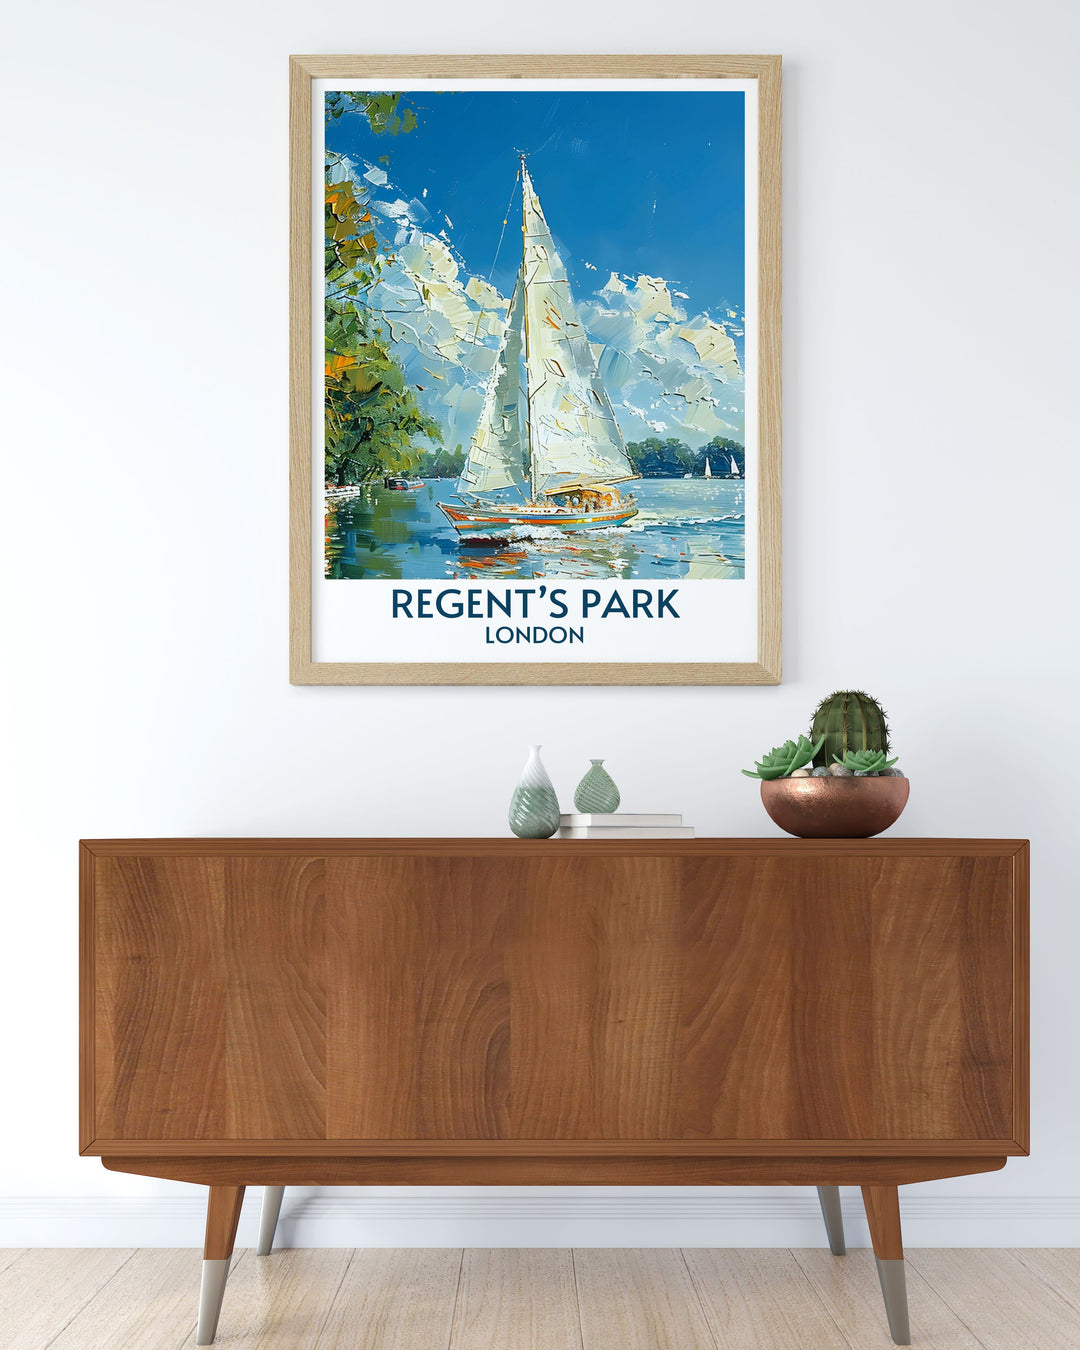 Regents Park Boating Lake Posters bringing the natural beauty and timeless charm of this beloved London park into your home.